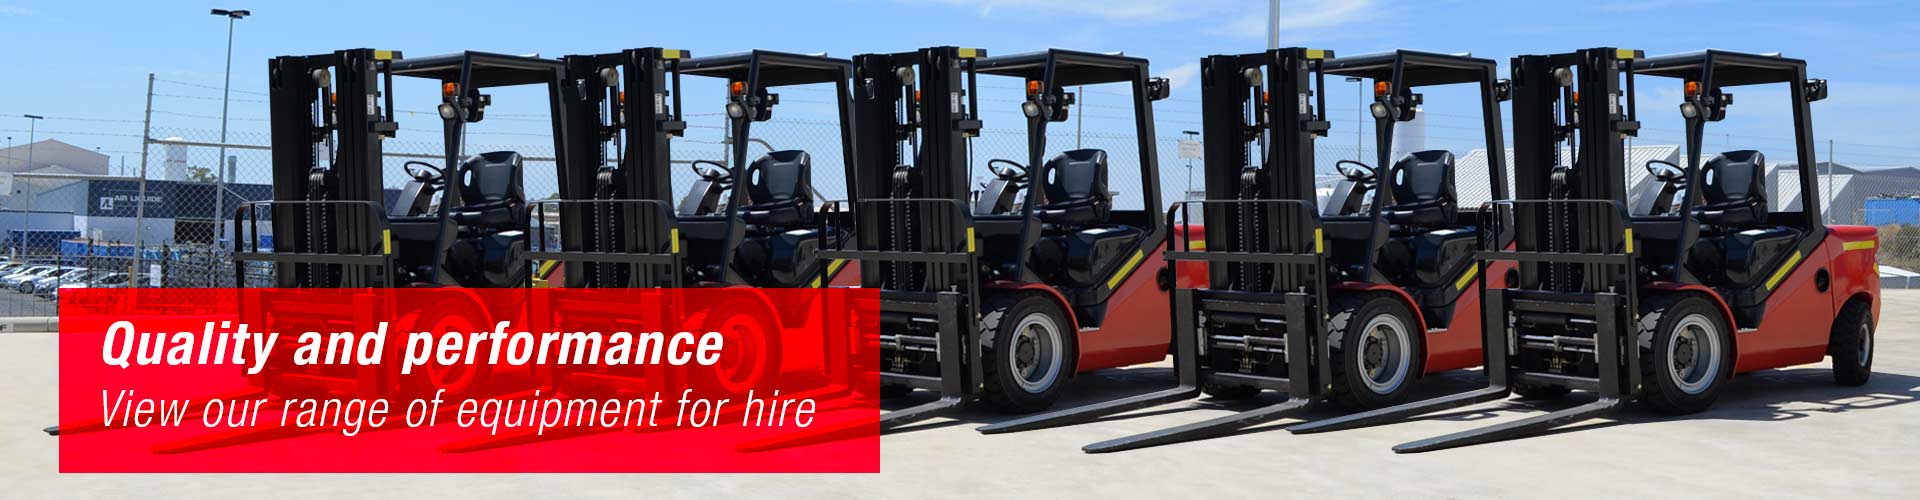 Forklifts made to your specifications